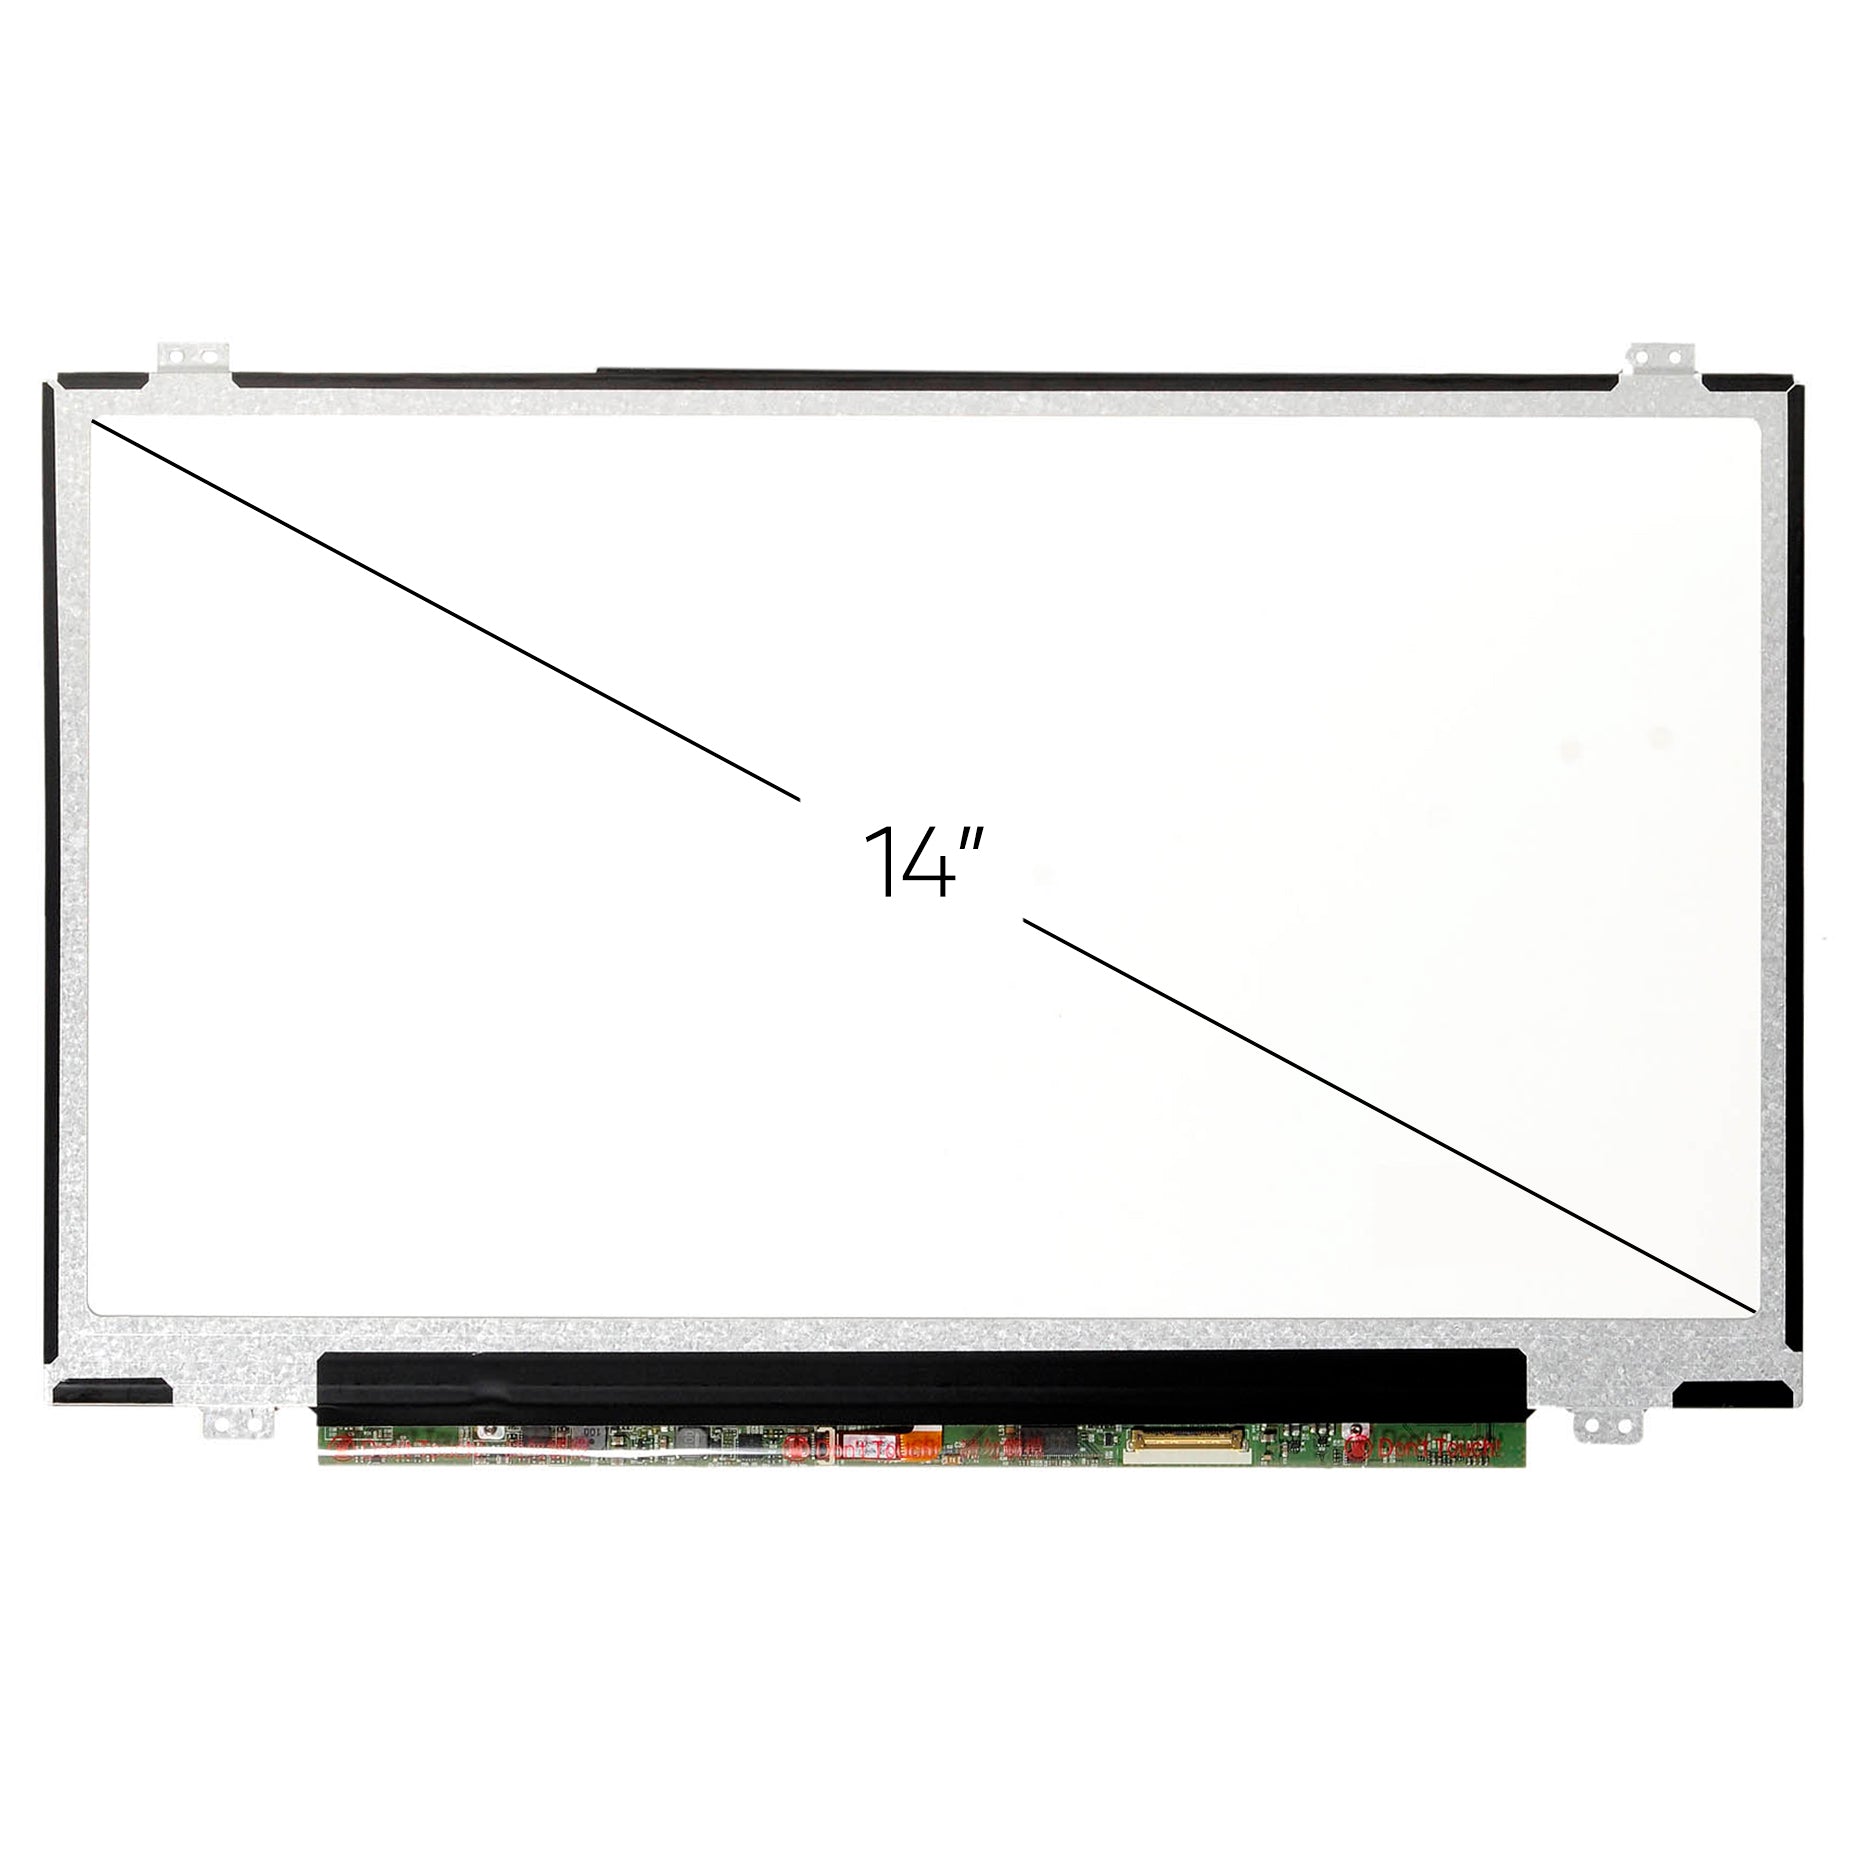 Screen Replacement for NV140FHM-N4A FHD 1920x1080 IPS Matte LCD LED Display